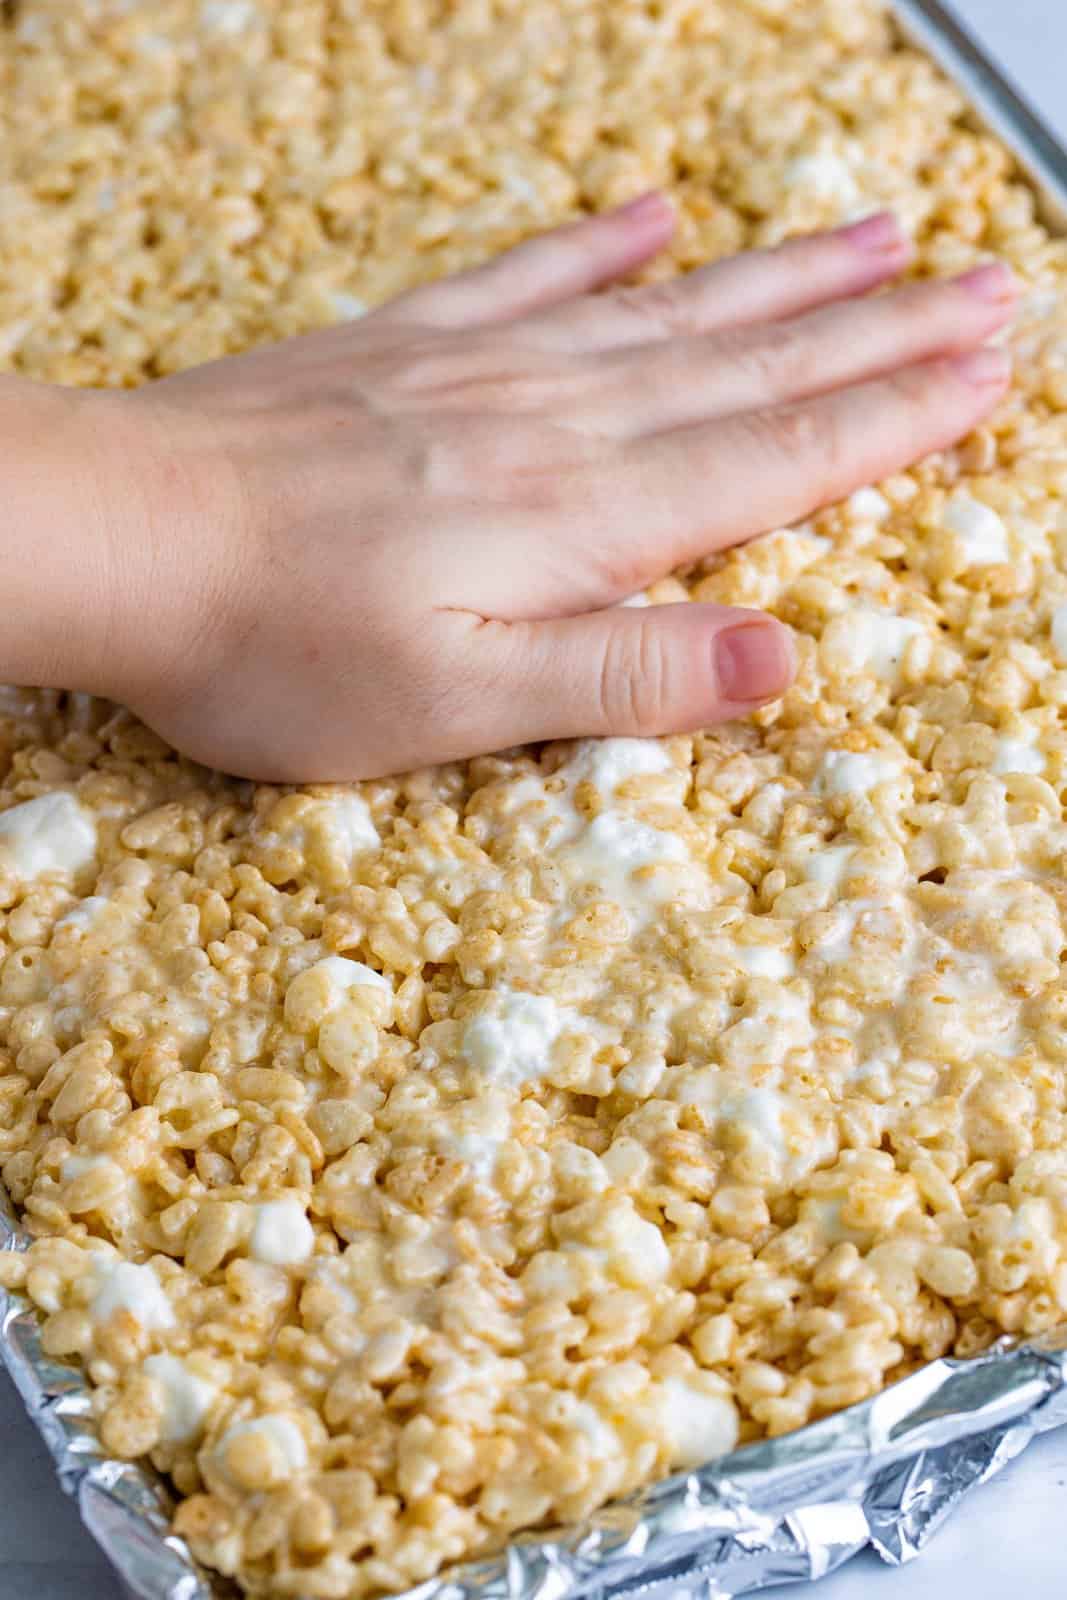 A hand pressing down on rice krispie treats in a pan.